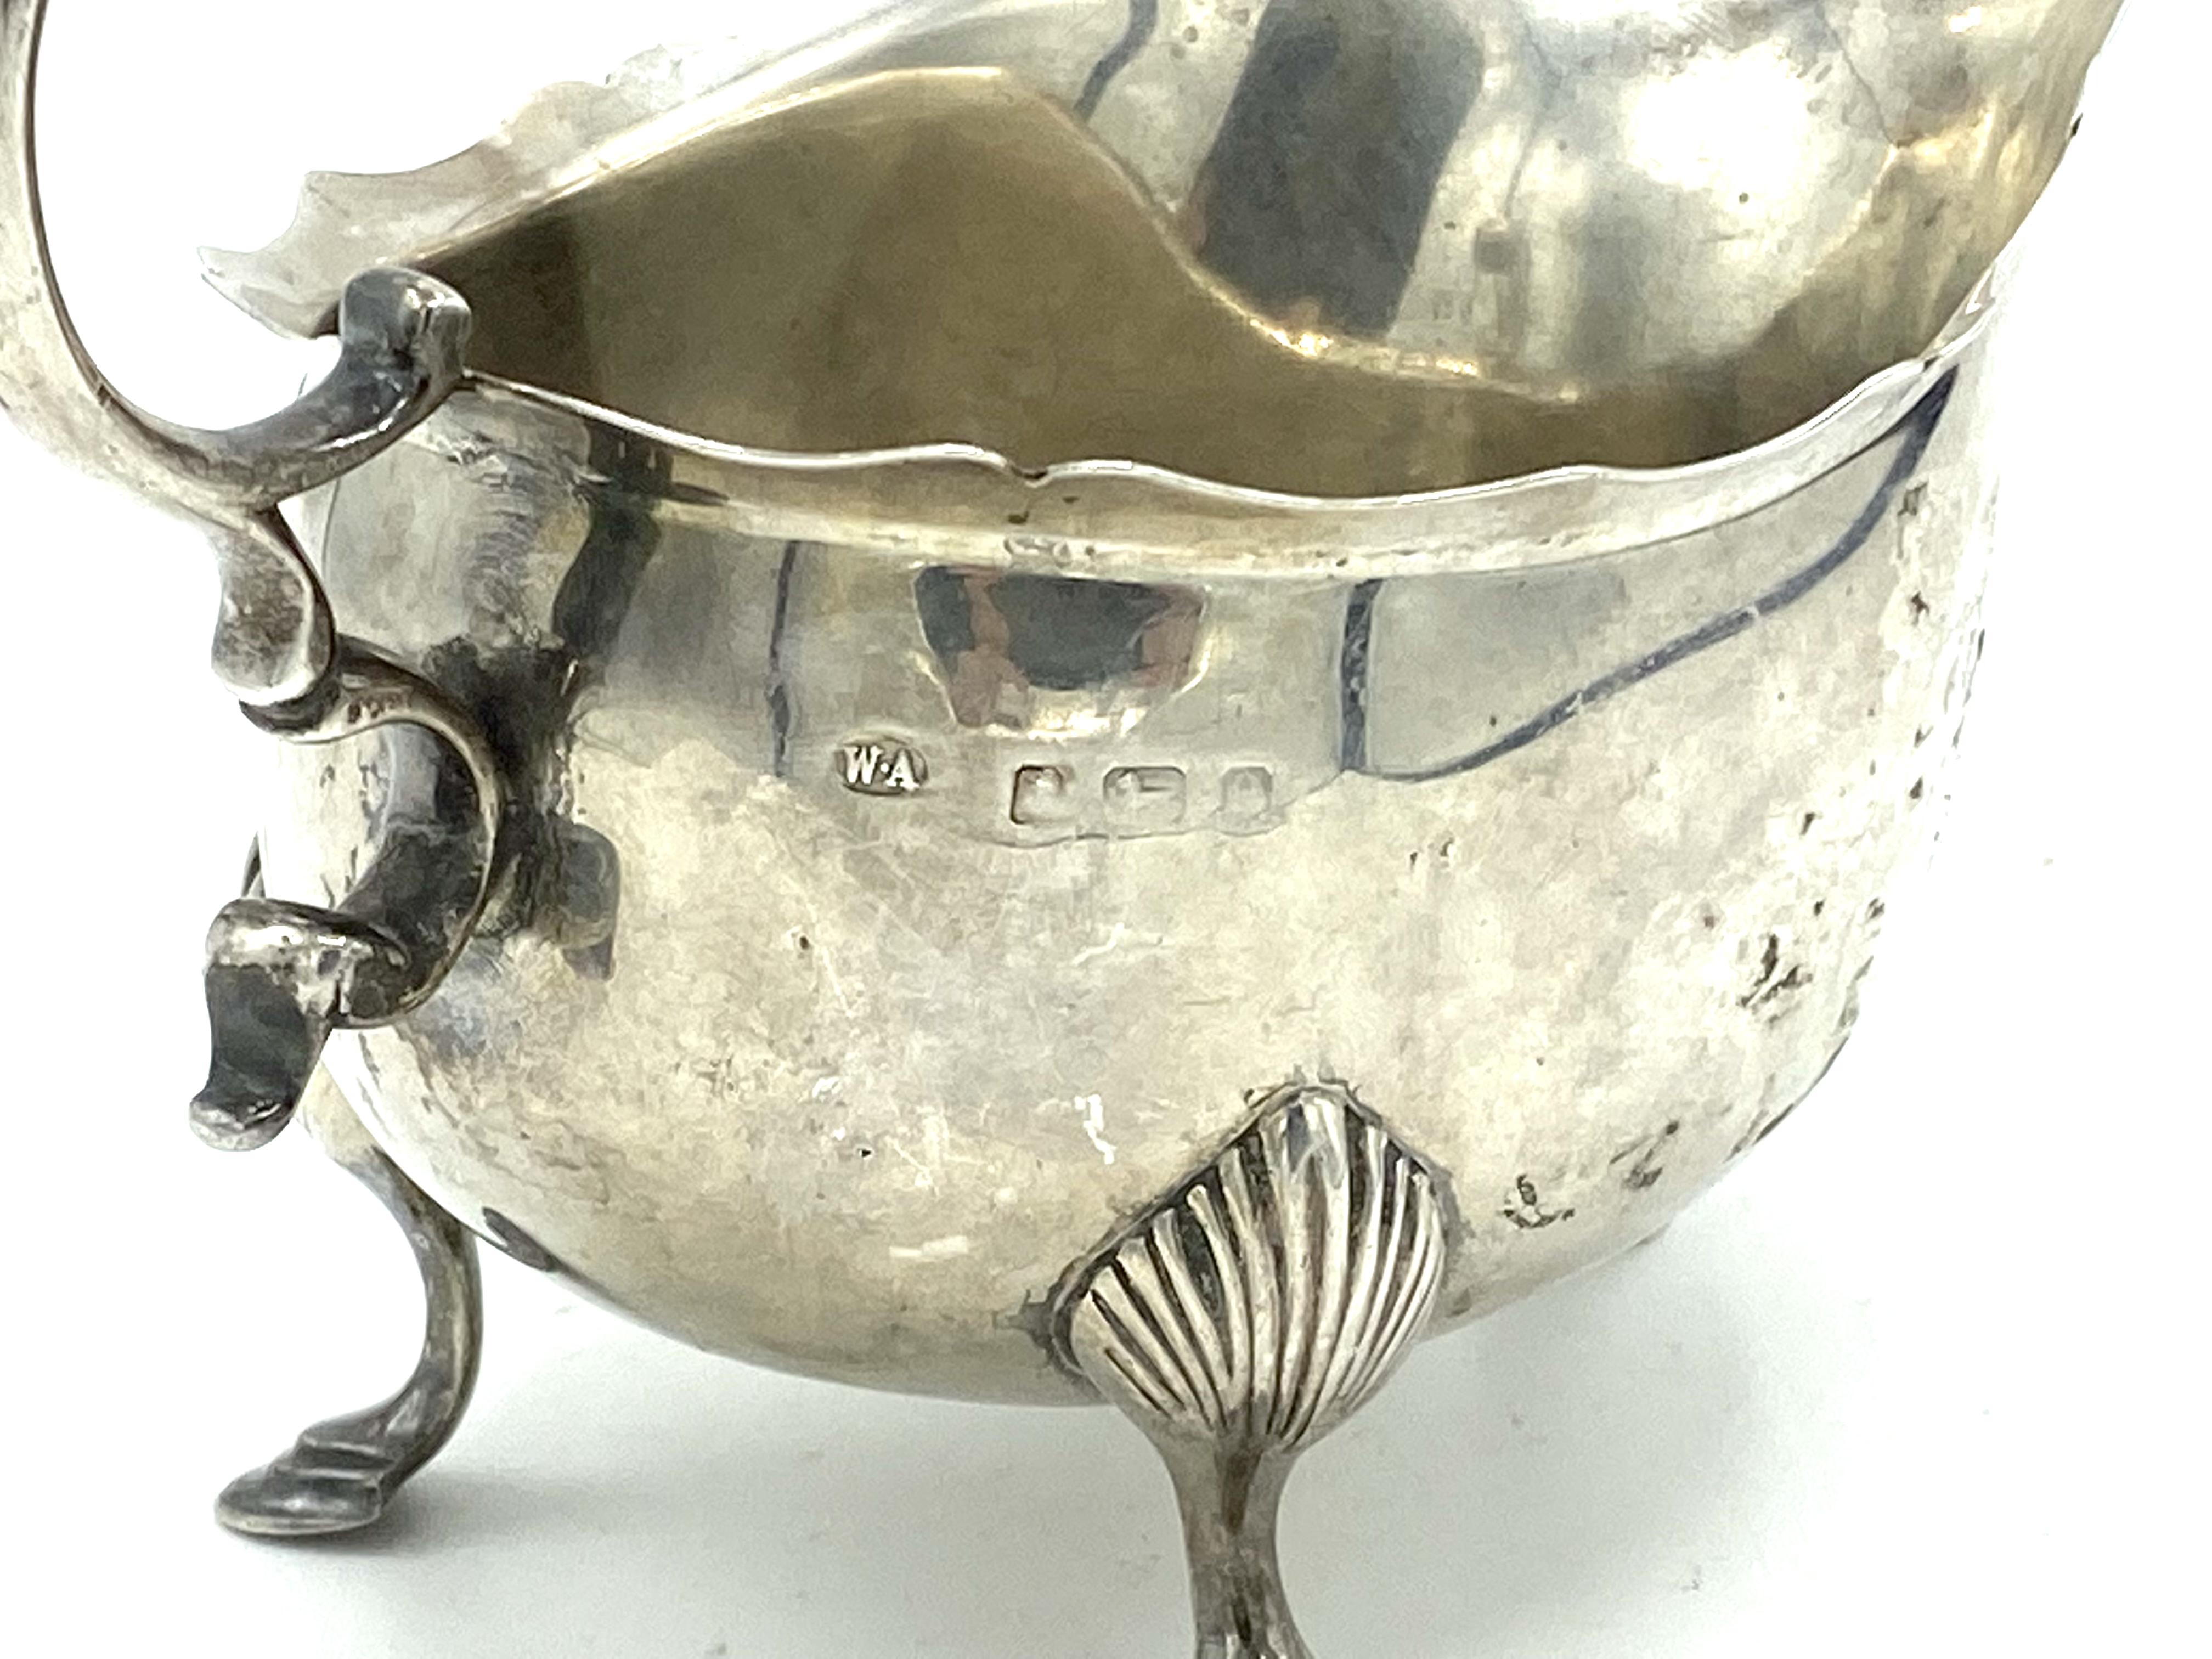 Silver sauce boat, 1951 by William Aitkin & Son - Image 4 of 4